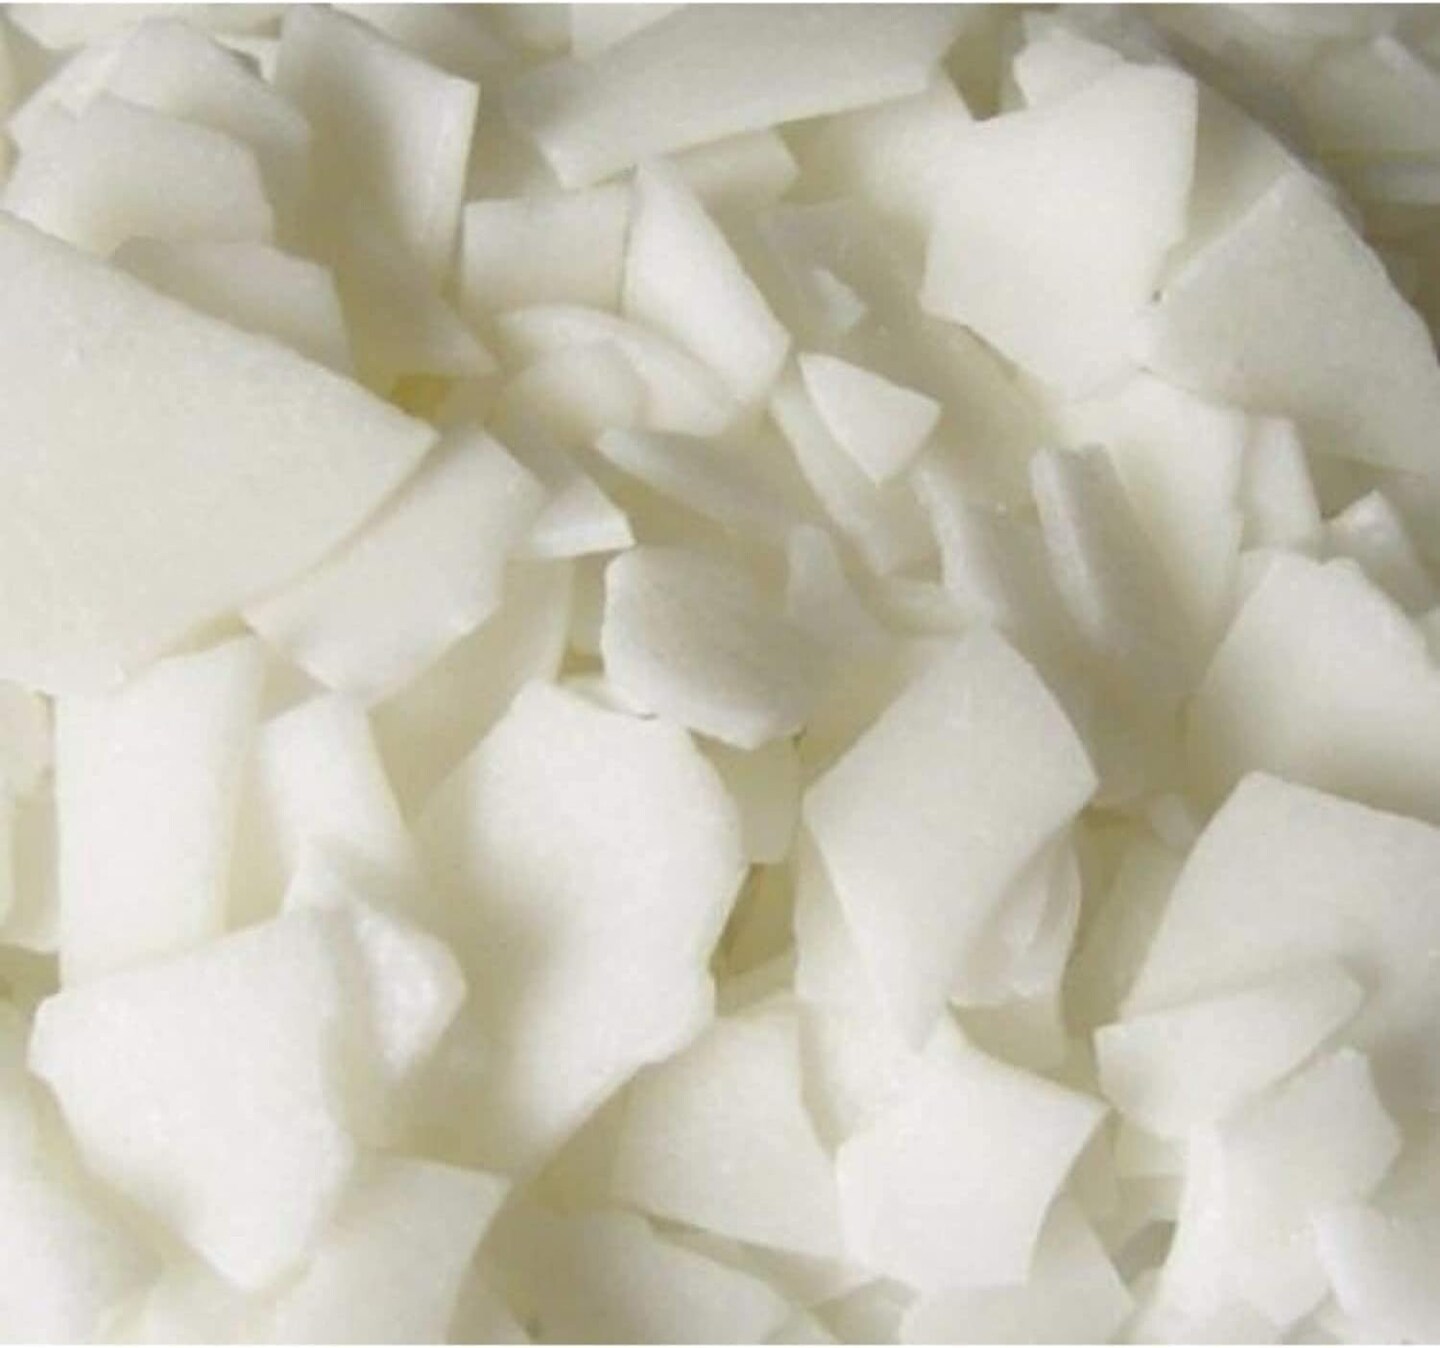 Pure Soy Wax 402 for Candle and Tart Making - 10 LB